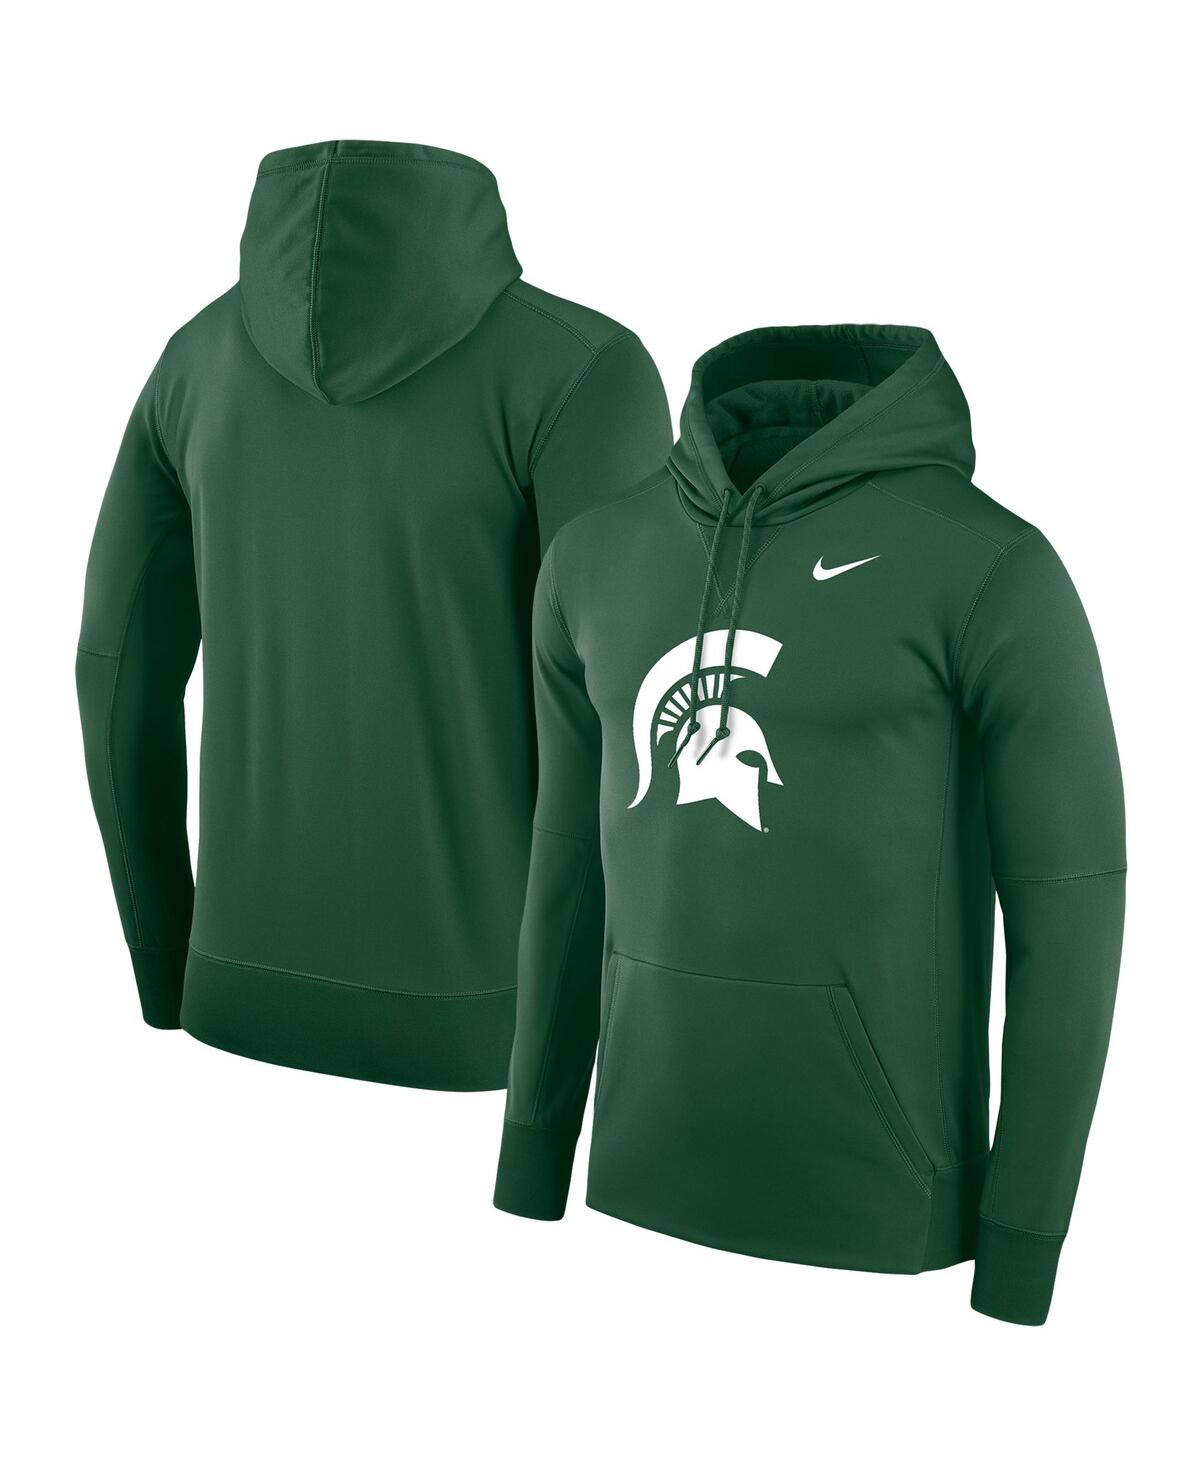 Shop Nike Men's  Green Michigan State Spartans Performance Pullover Hoodie